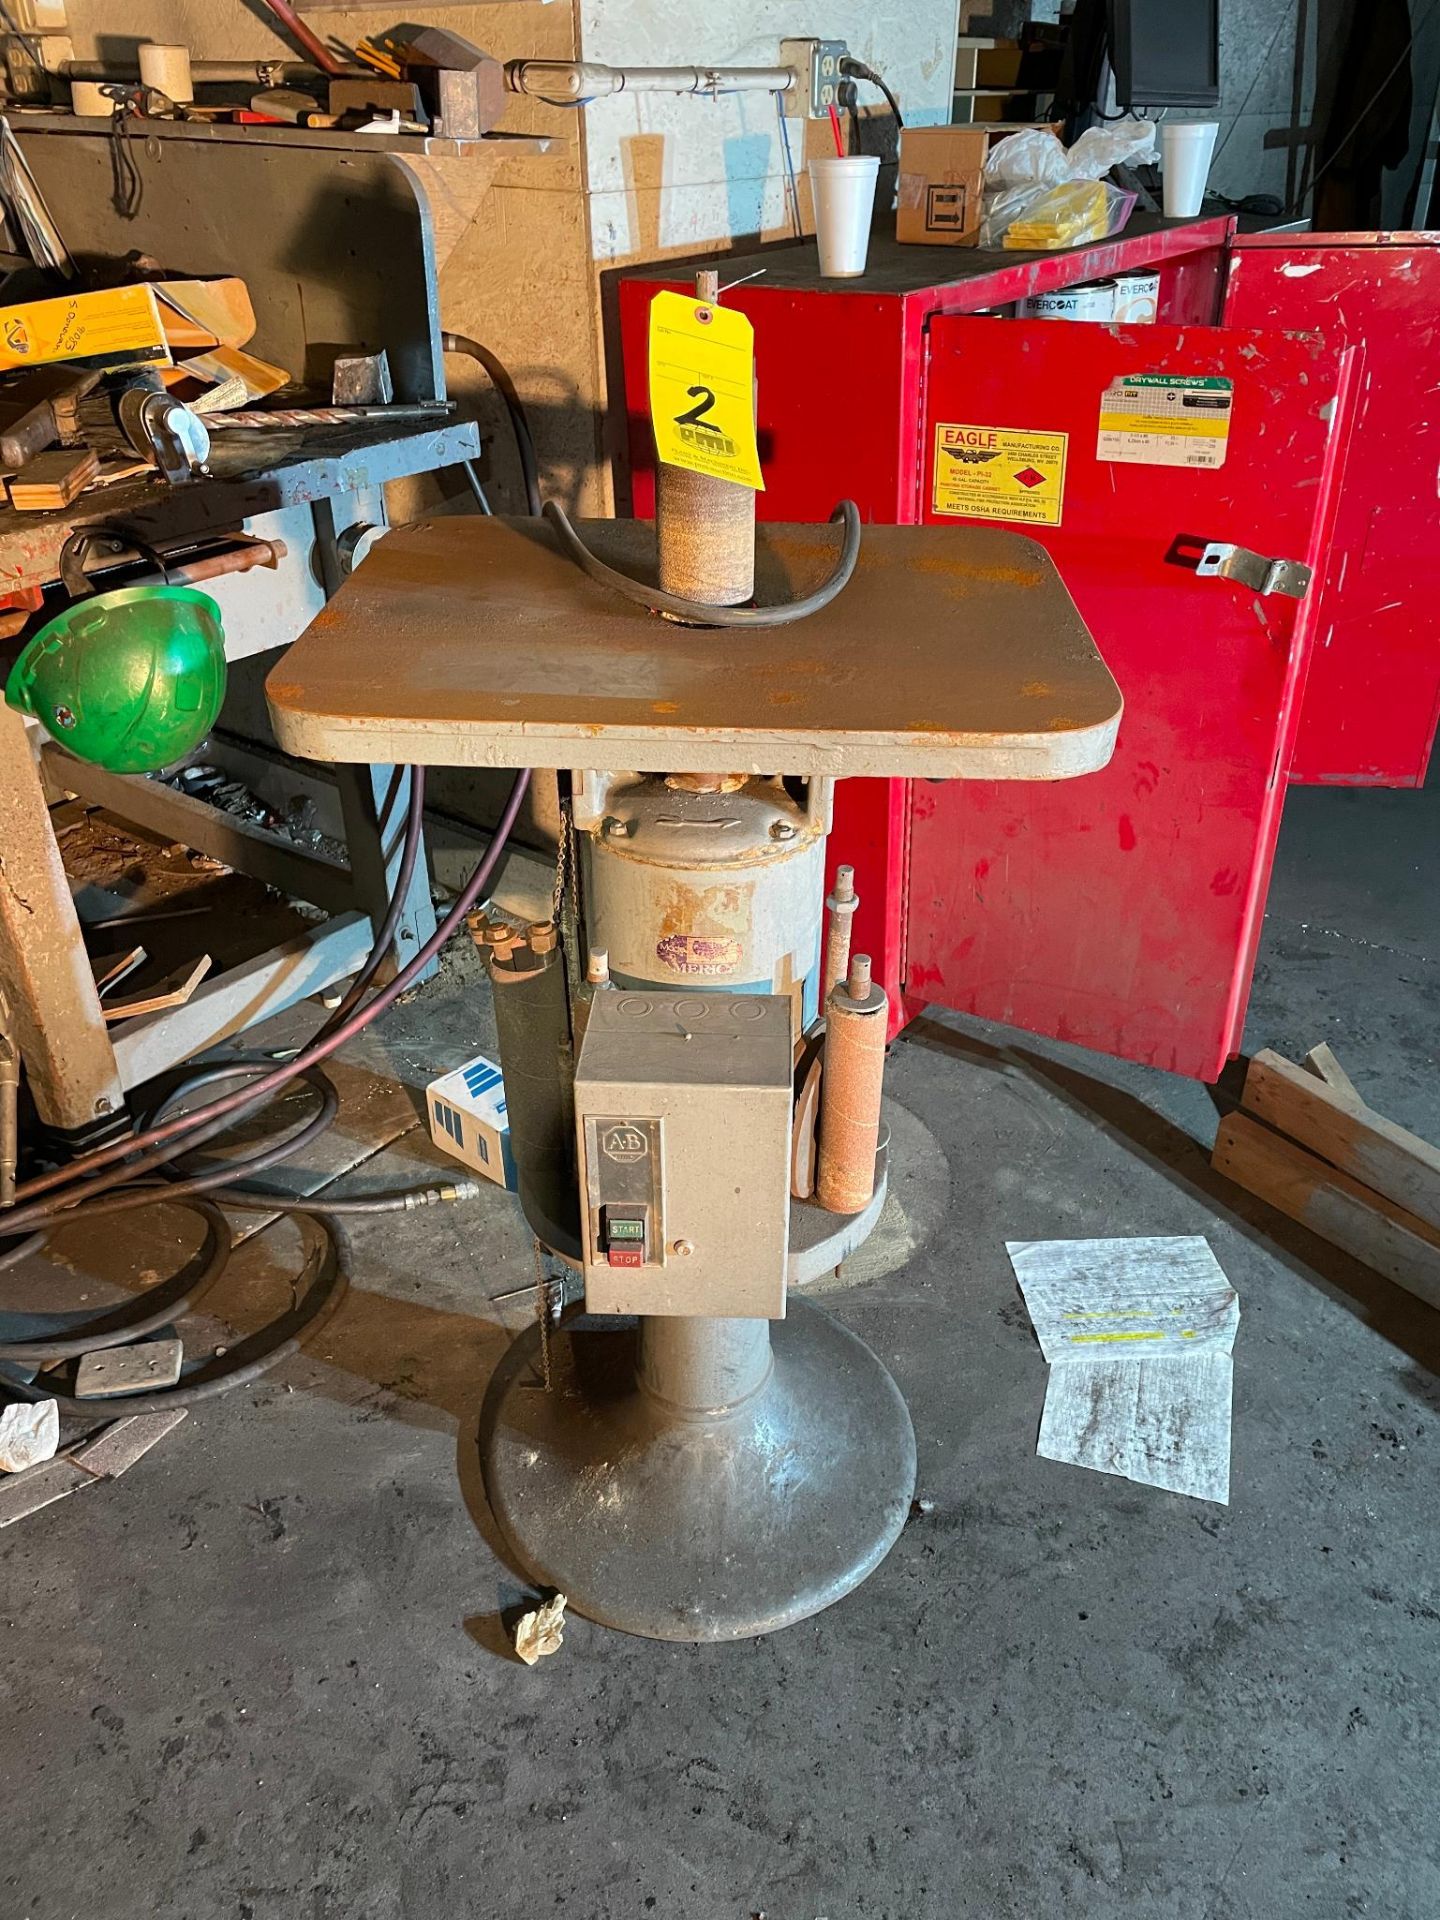 OSCILLATING SPINDLE DRUM SANDER, MFG. UNKNOWN, 115/130 v., 1/2 HP, 1,725 RPM (Made in America)